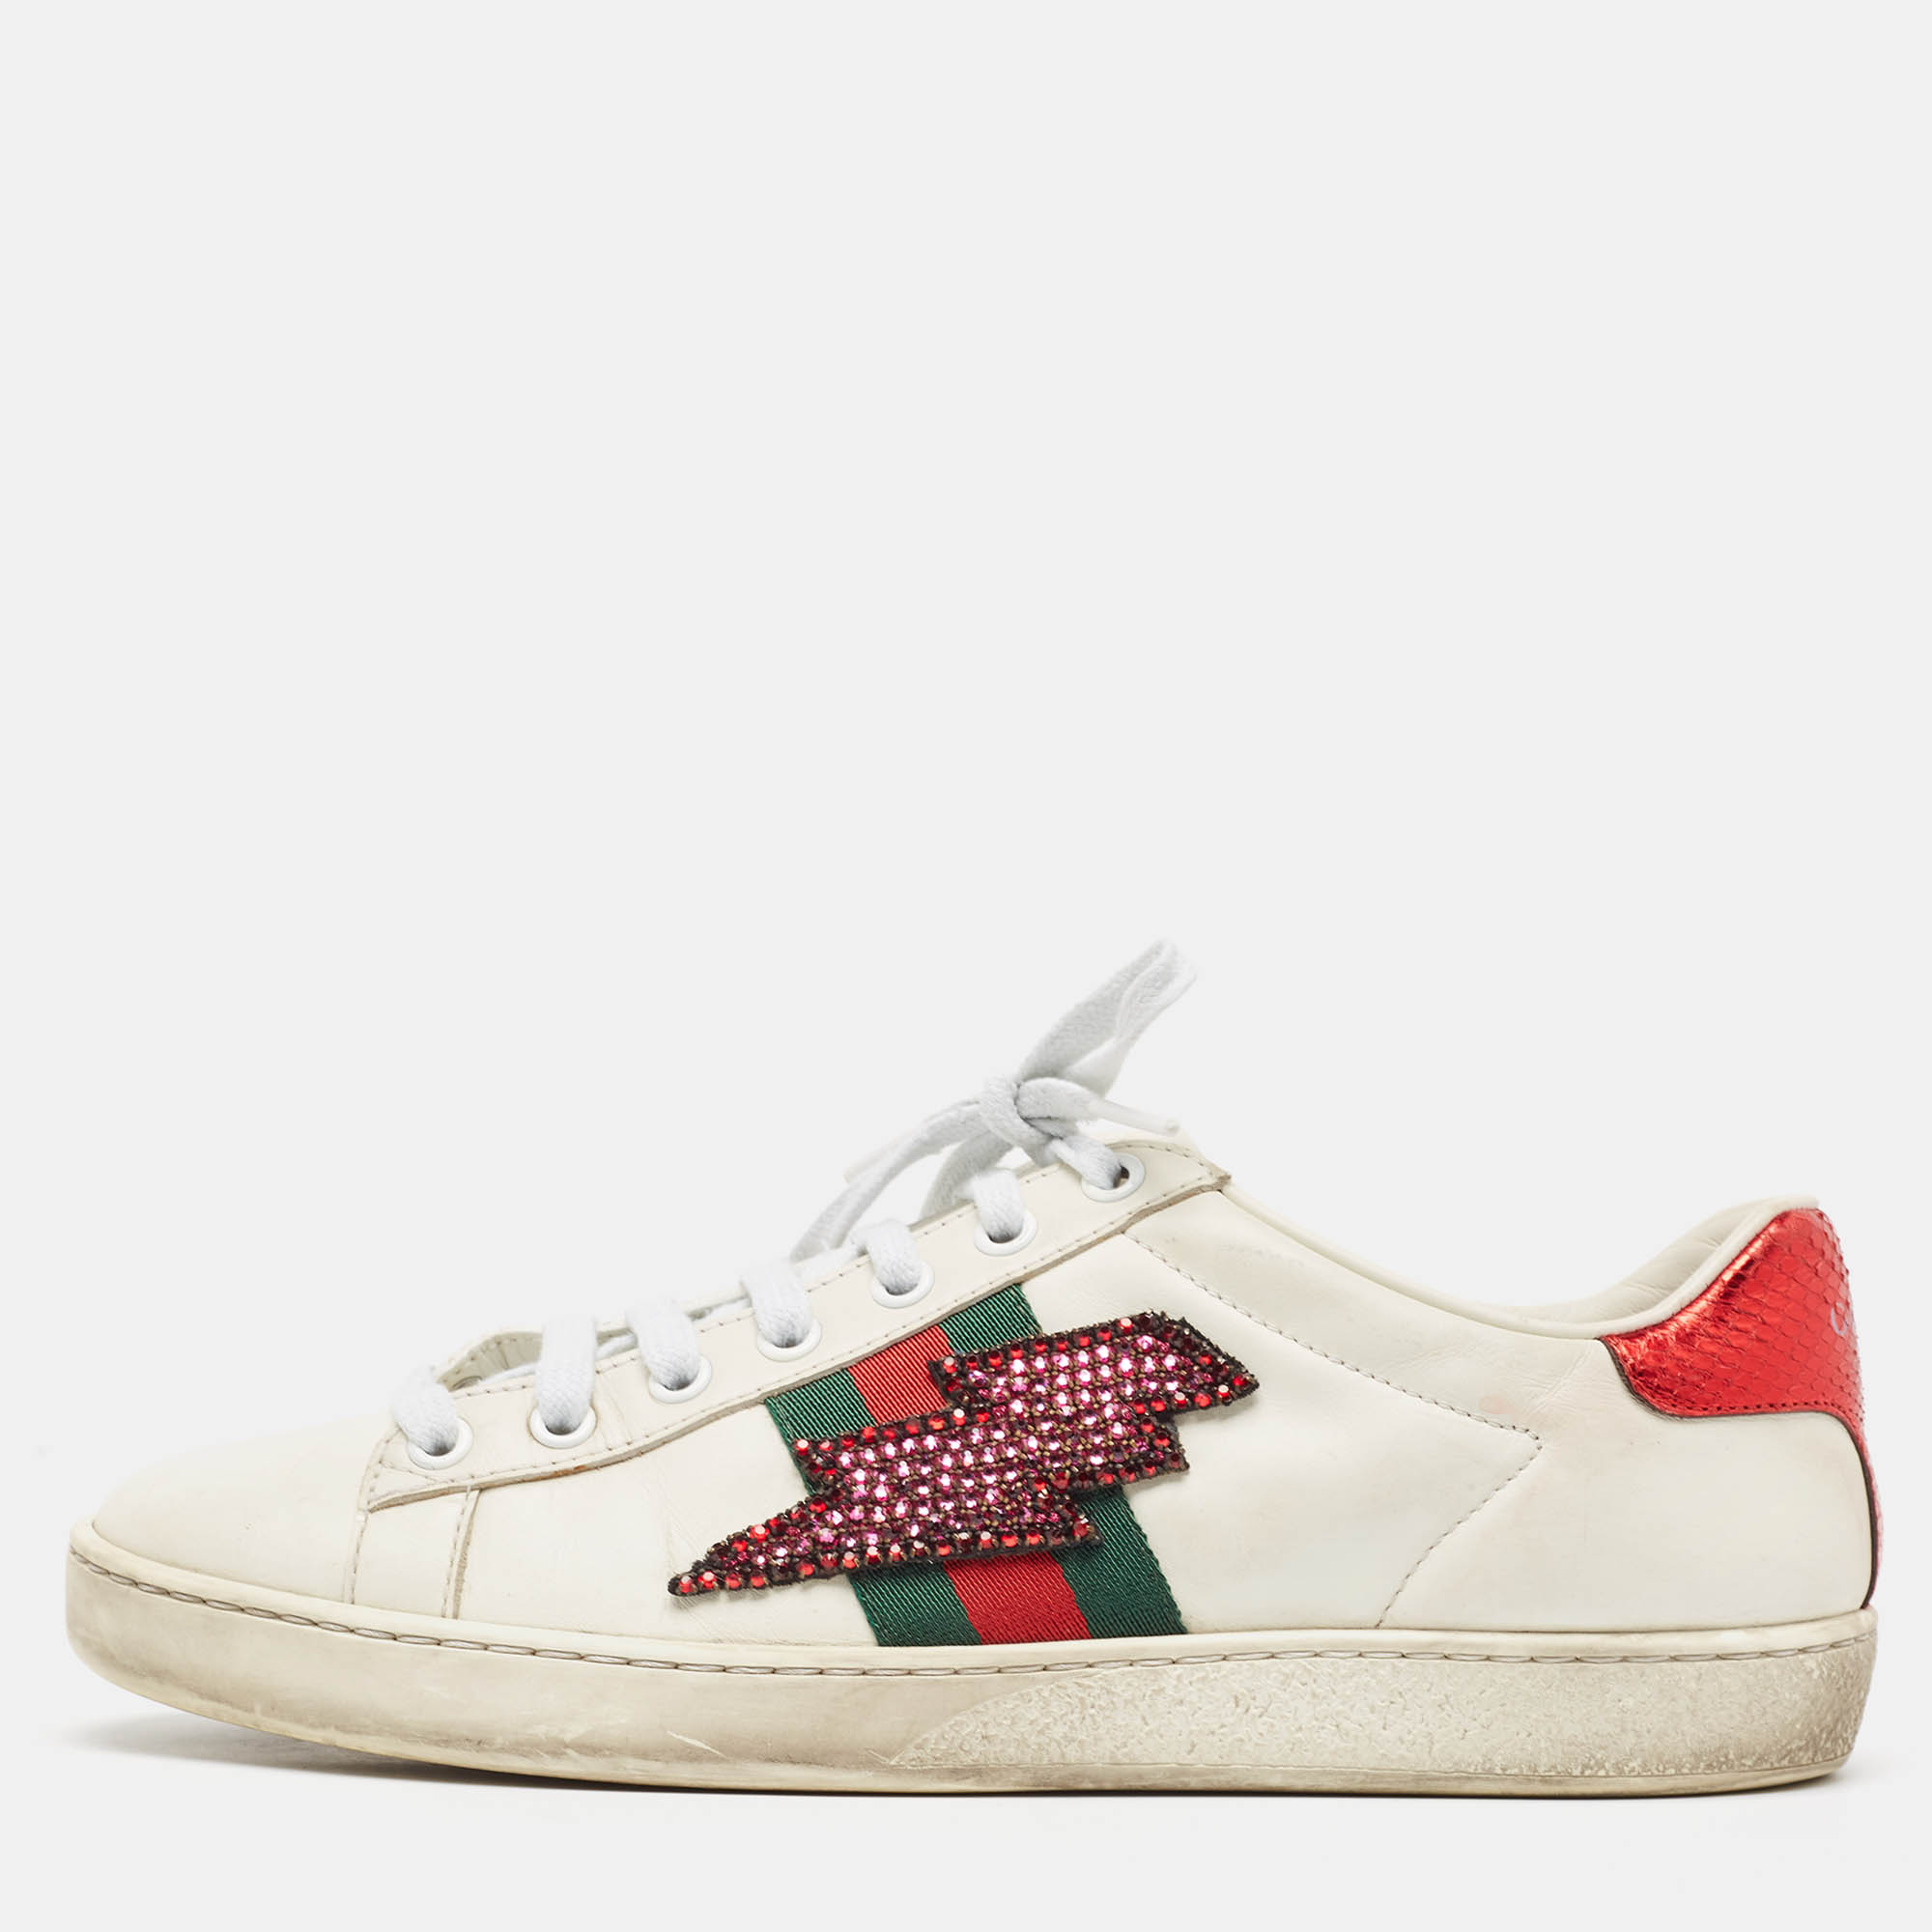 Gucci white leather and snakeskin ace sneakers size 38